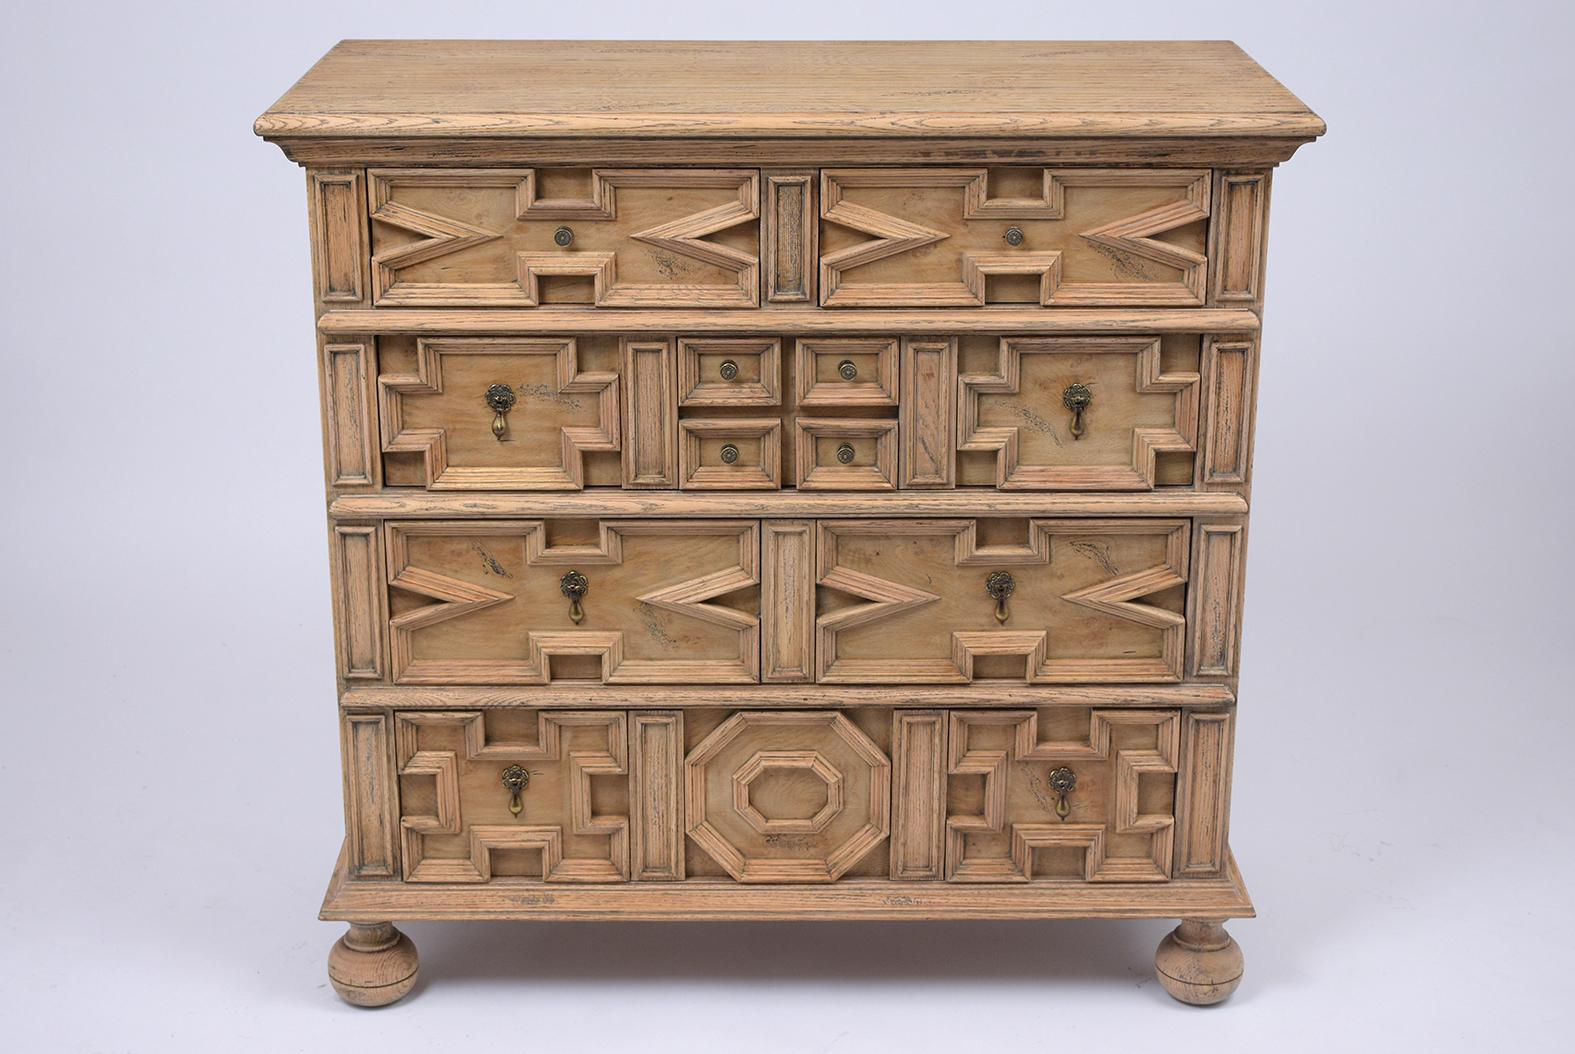 This vintage Italian Baroque style dresser has been restored is made out of oak wood with newly bleached finish. This piece features a wooden top, four drawers with symmetric design, molded paneling, and comes with brass knobs and handles. This